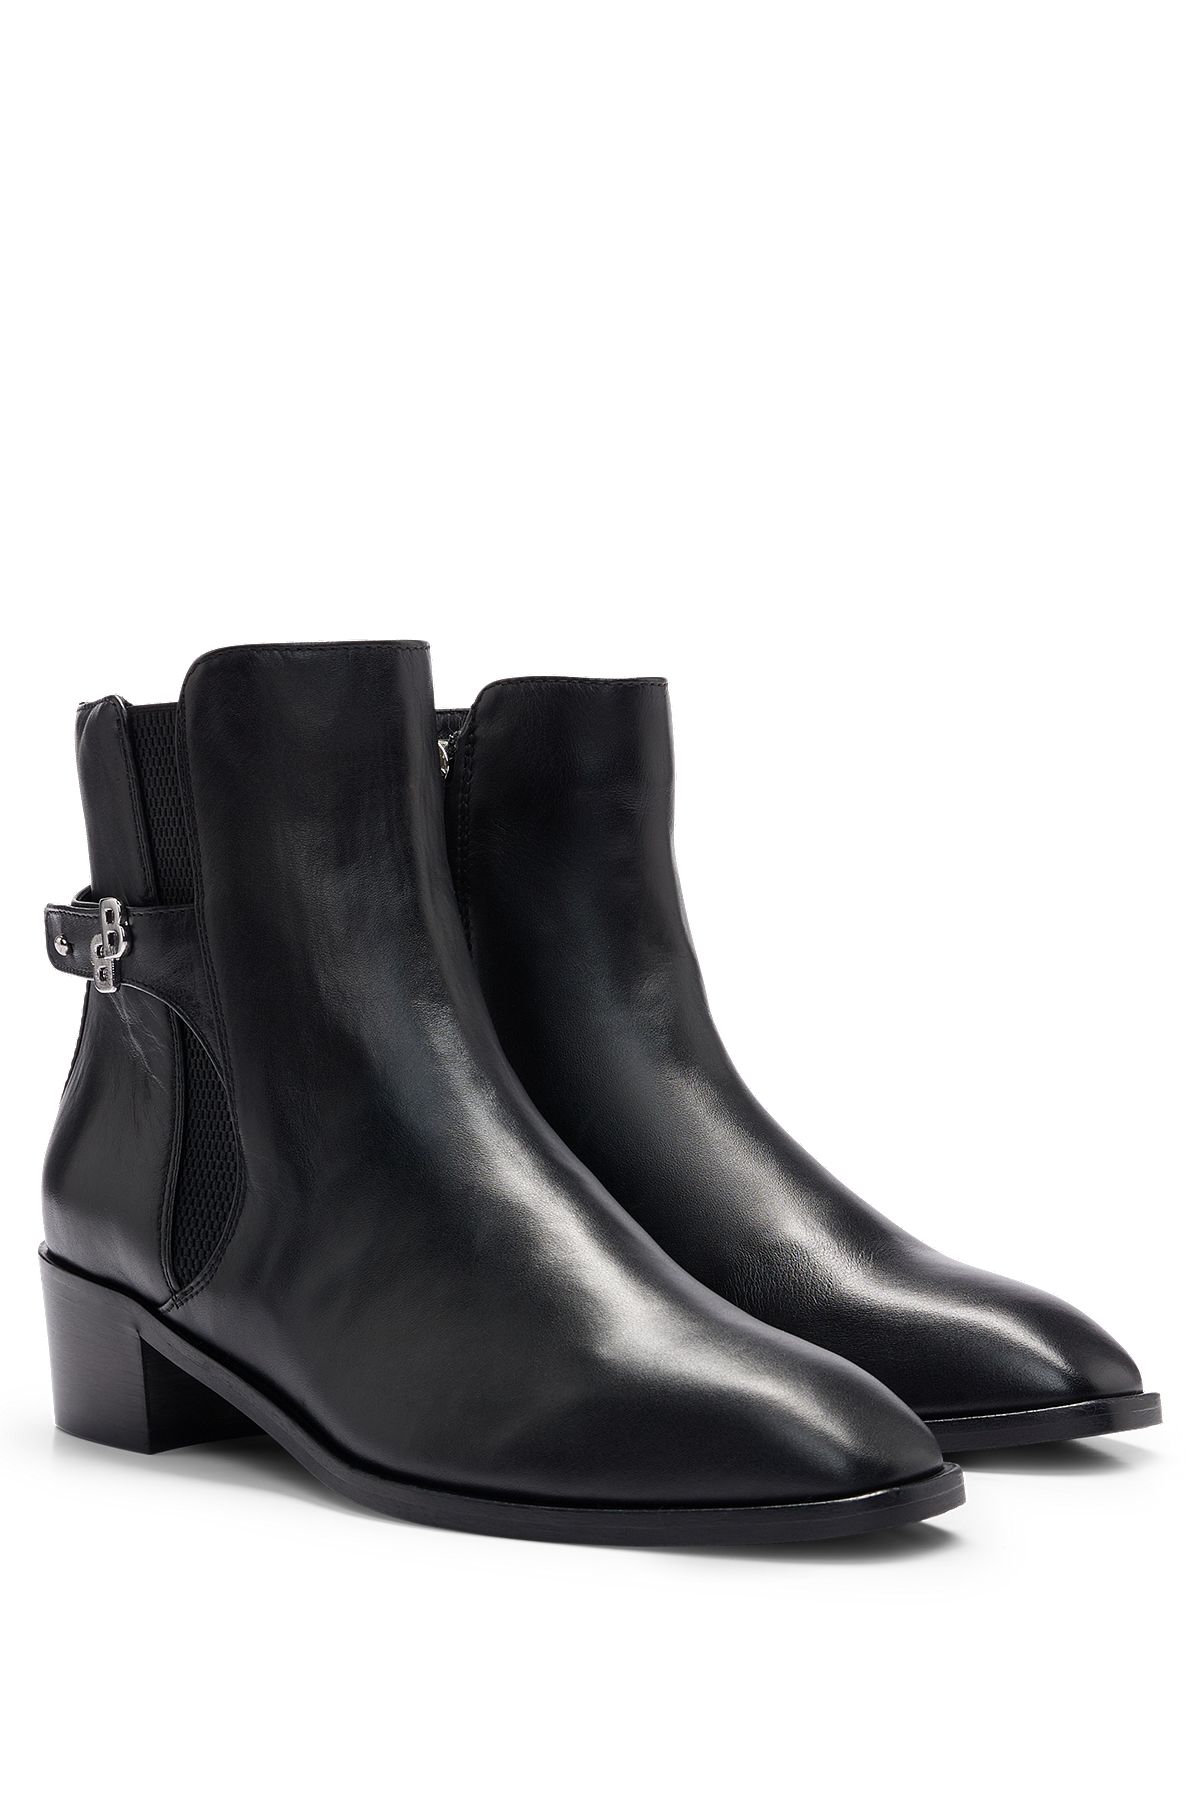 Double-monogram ankle boots in nappa leather, Black